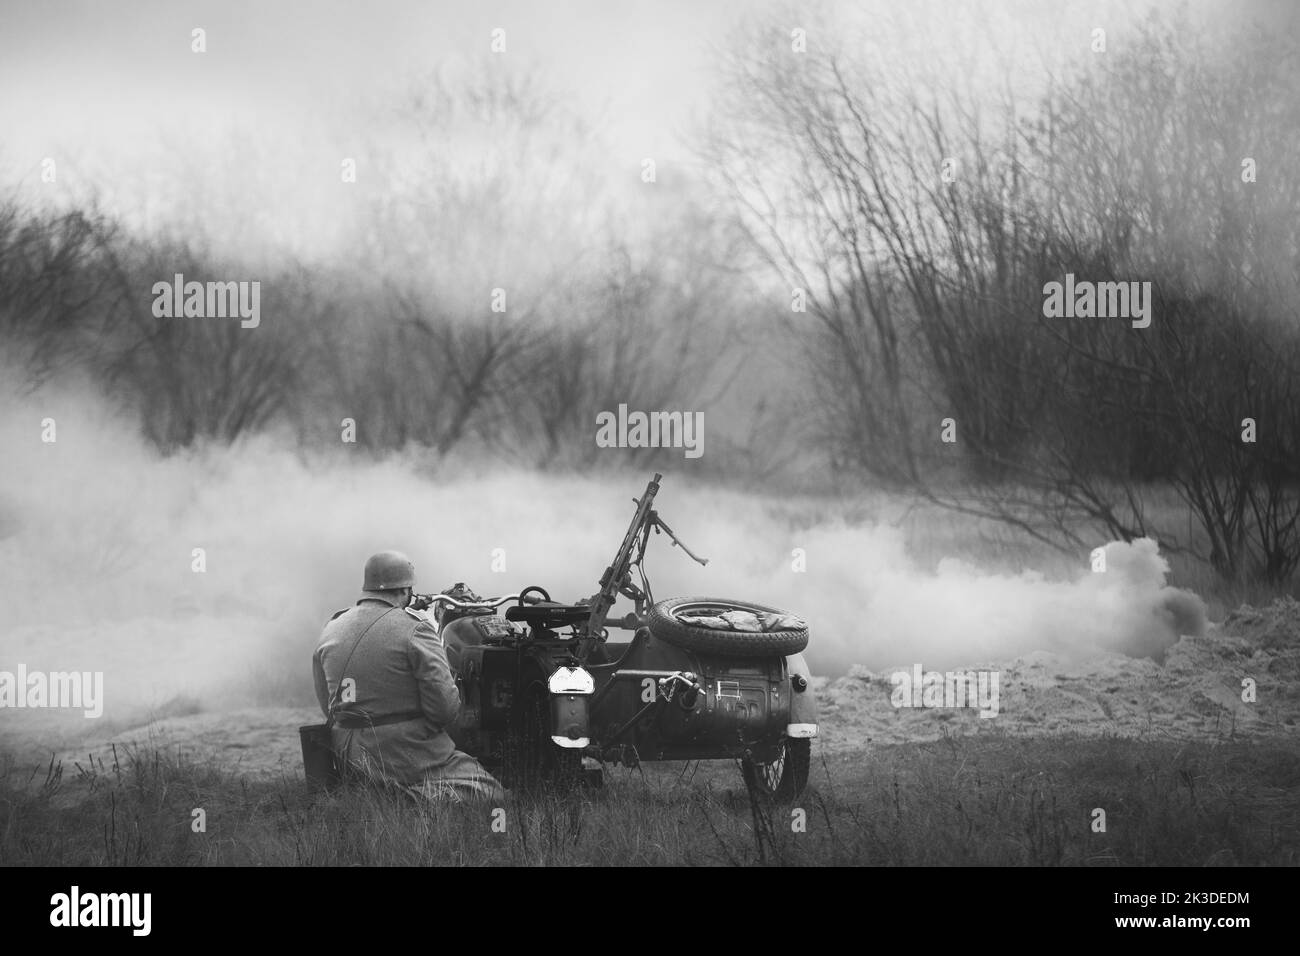 Re-enactor Dressed As World War Ii German Wehrmacht Infantry Soldier Sit Near Old Tricar, Armed Machinegun. Smokescreen. Army Three-wheeled Motorcycle Stock Photo